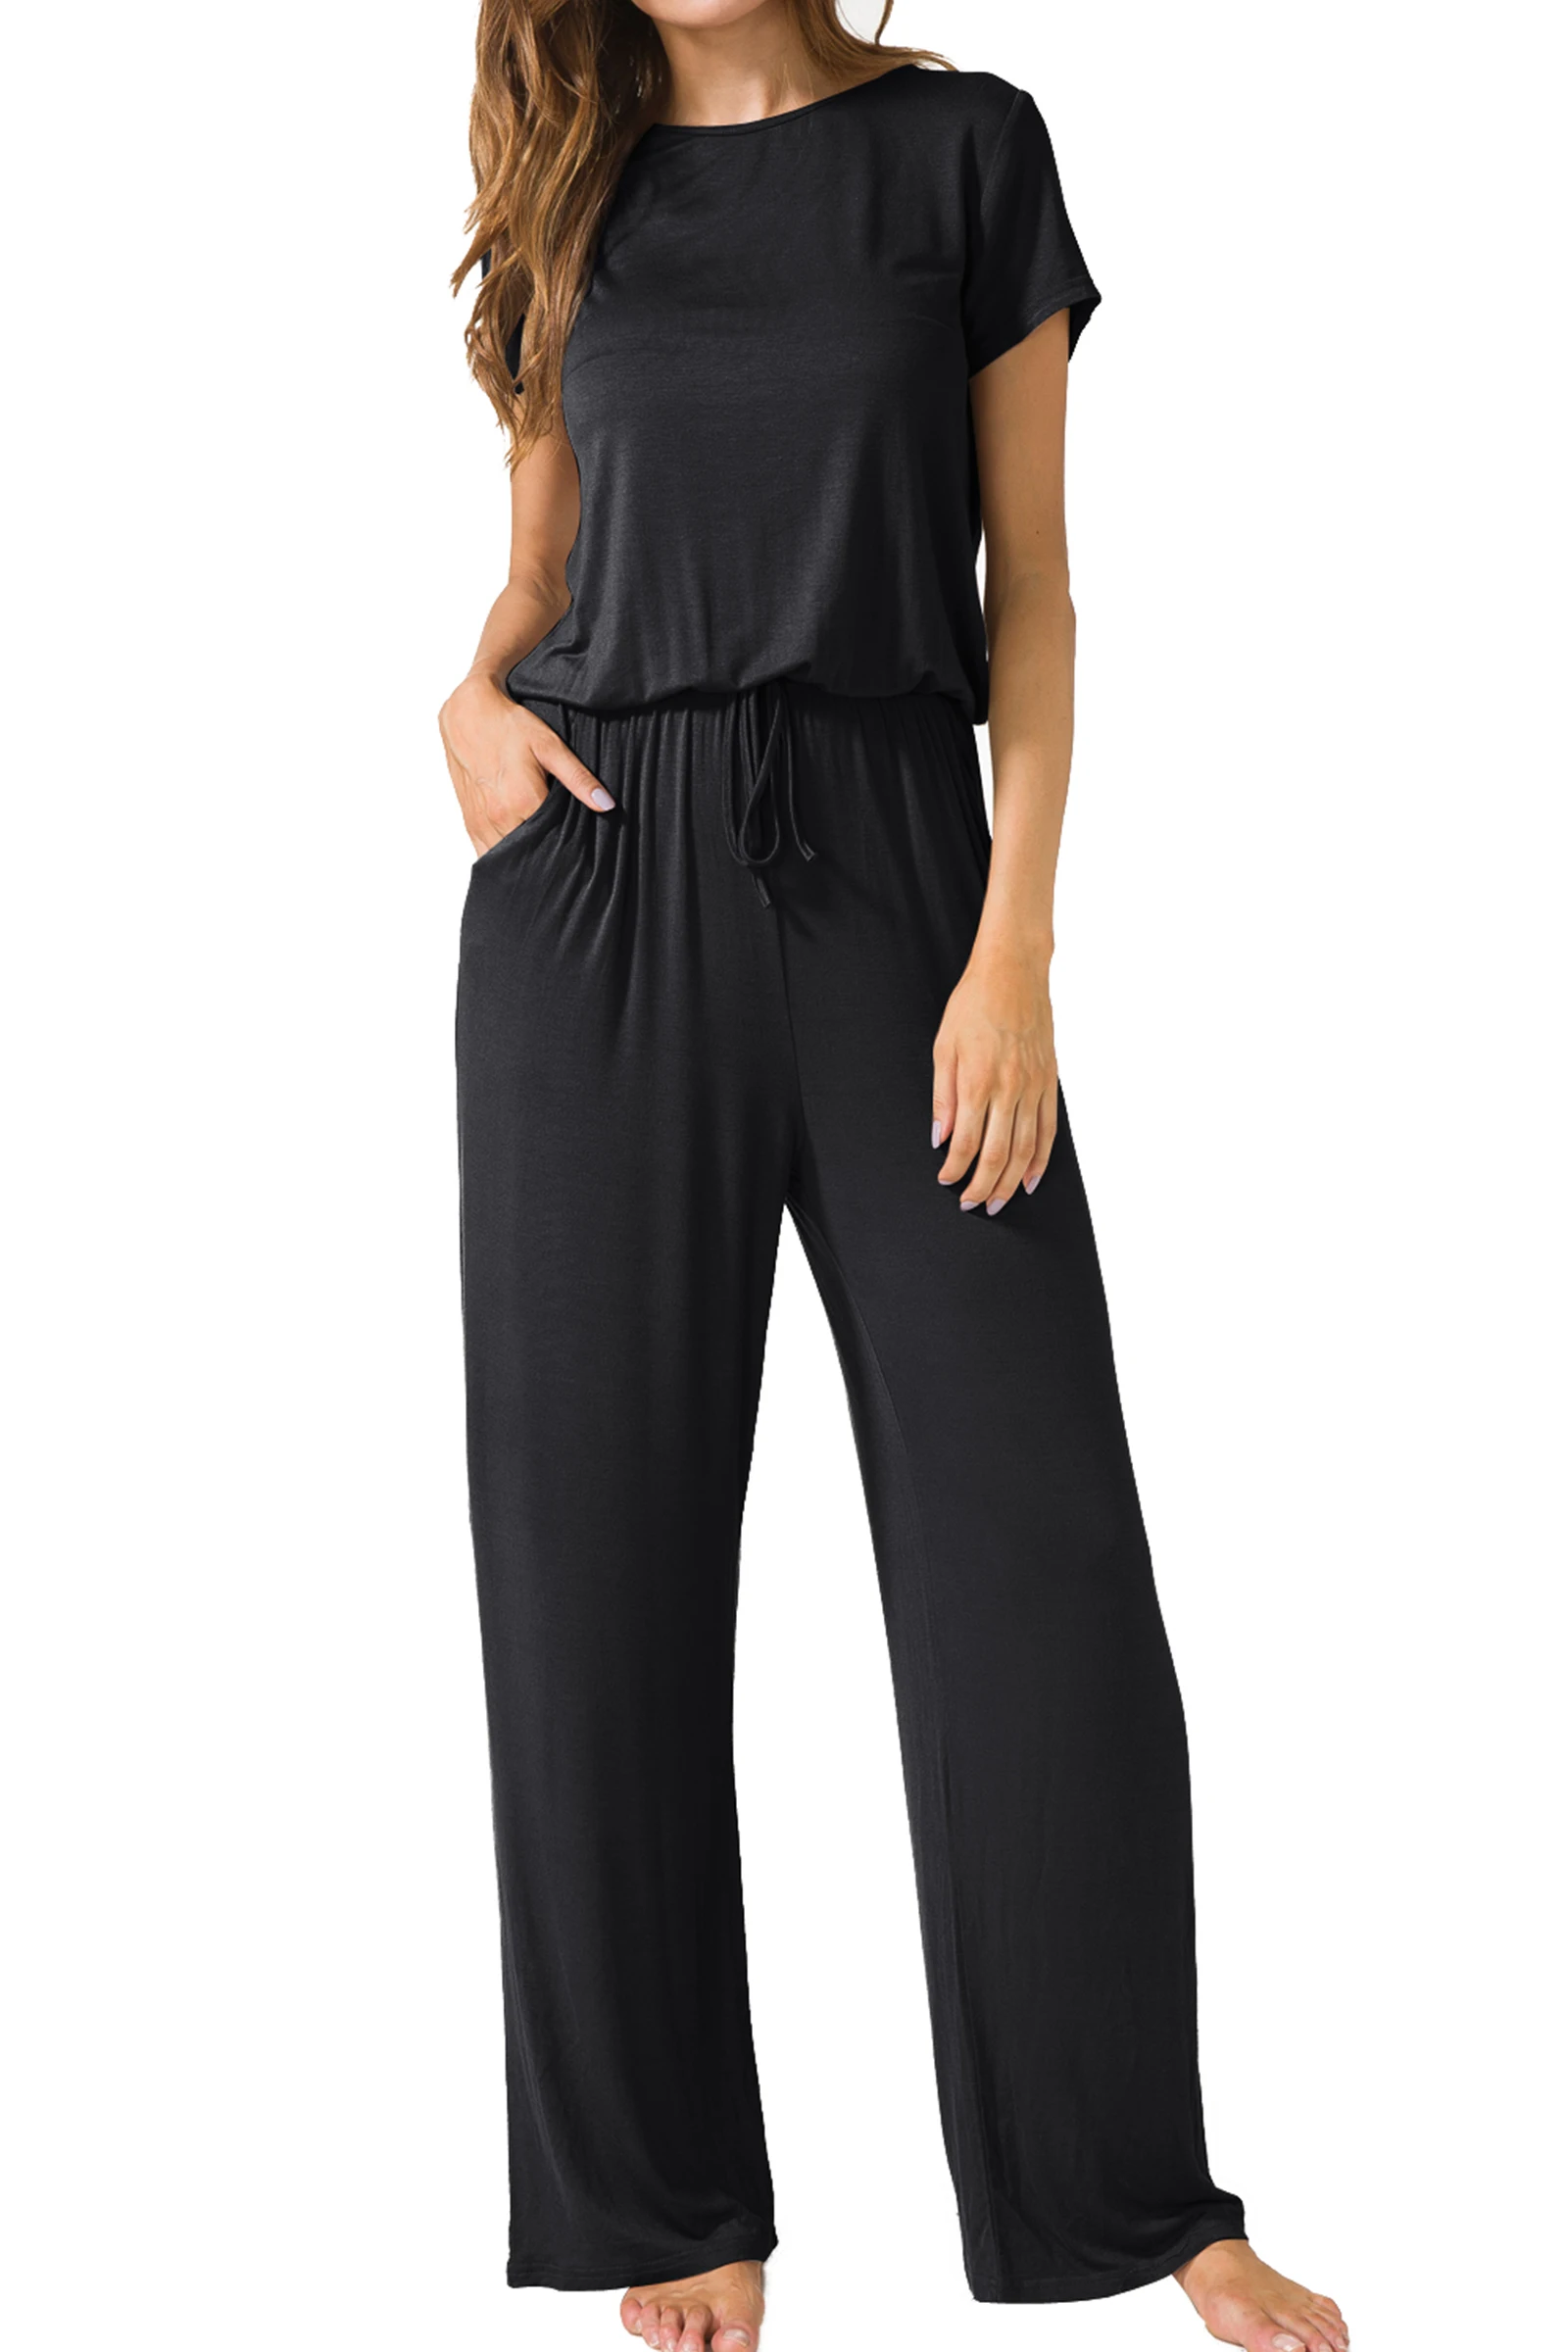 LEVACA Womens Drawstring Solid Round Neck Loose Wide Legs Casual Summer Jumpsuits